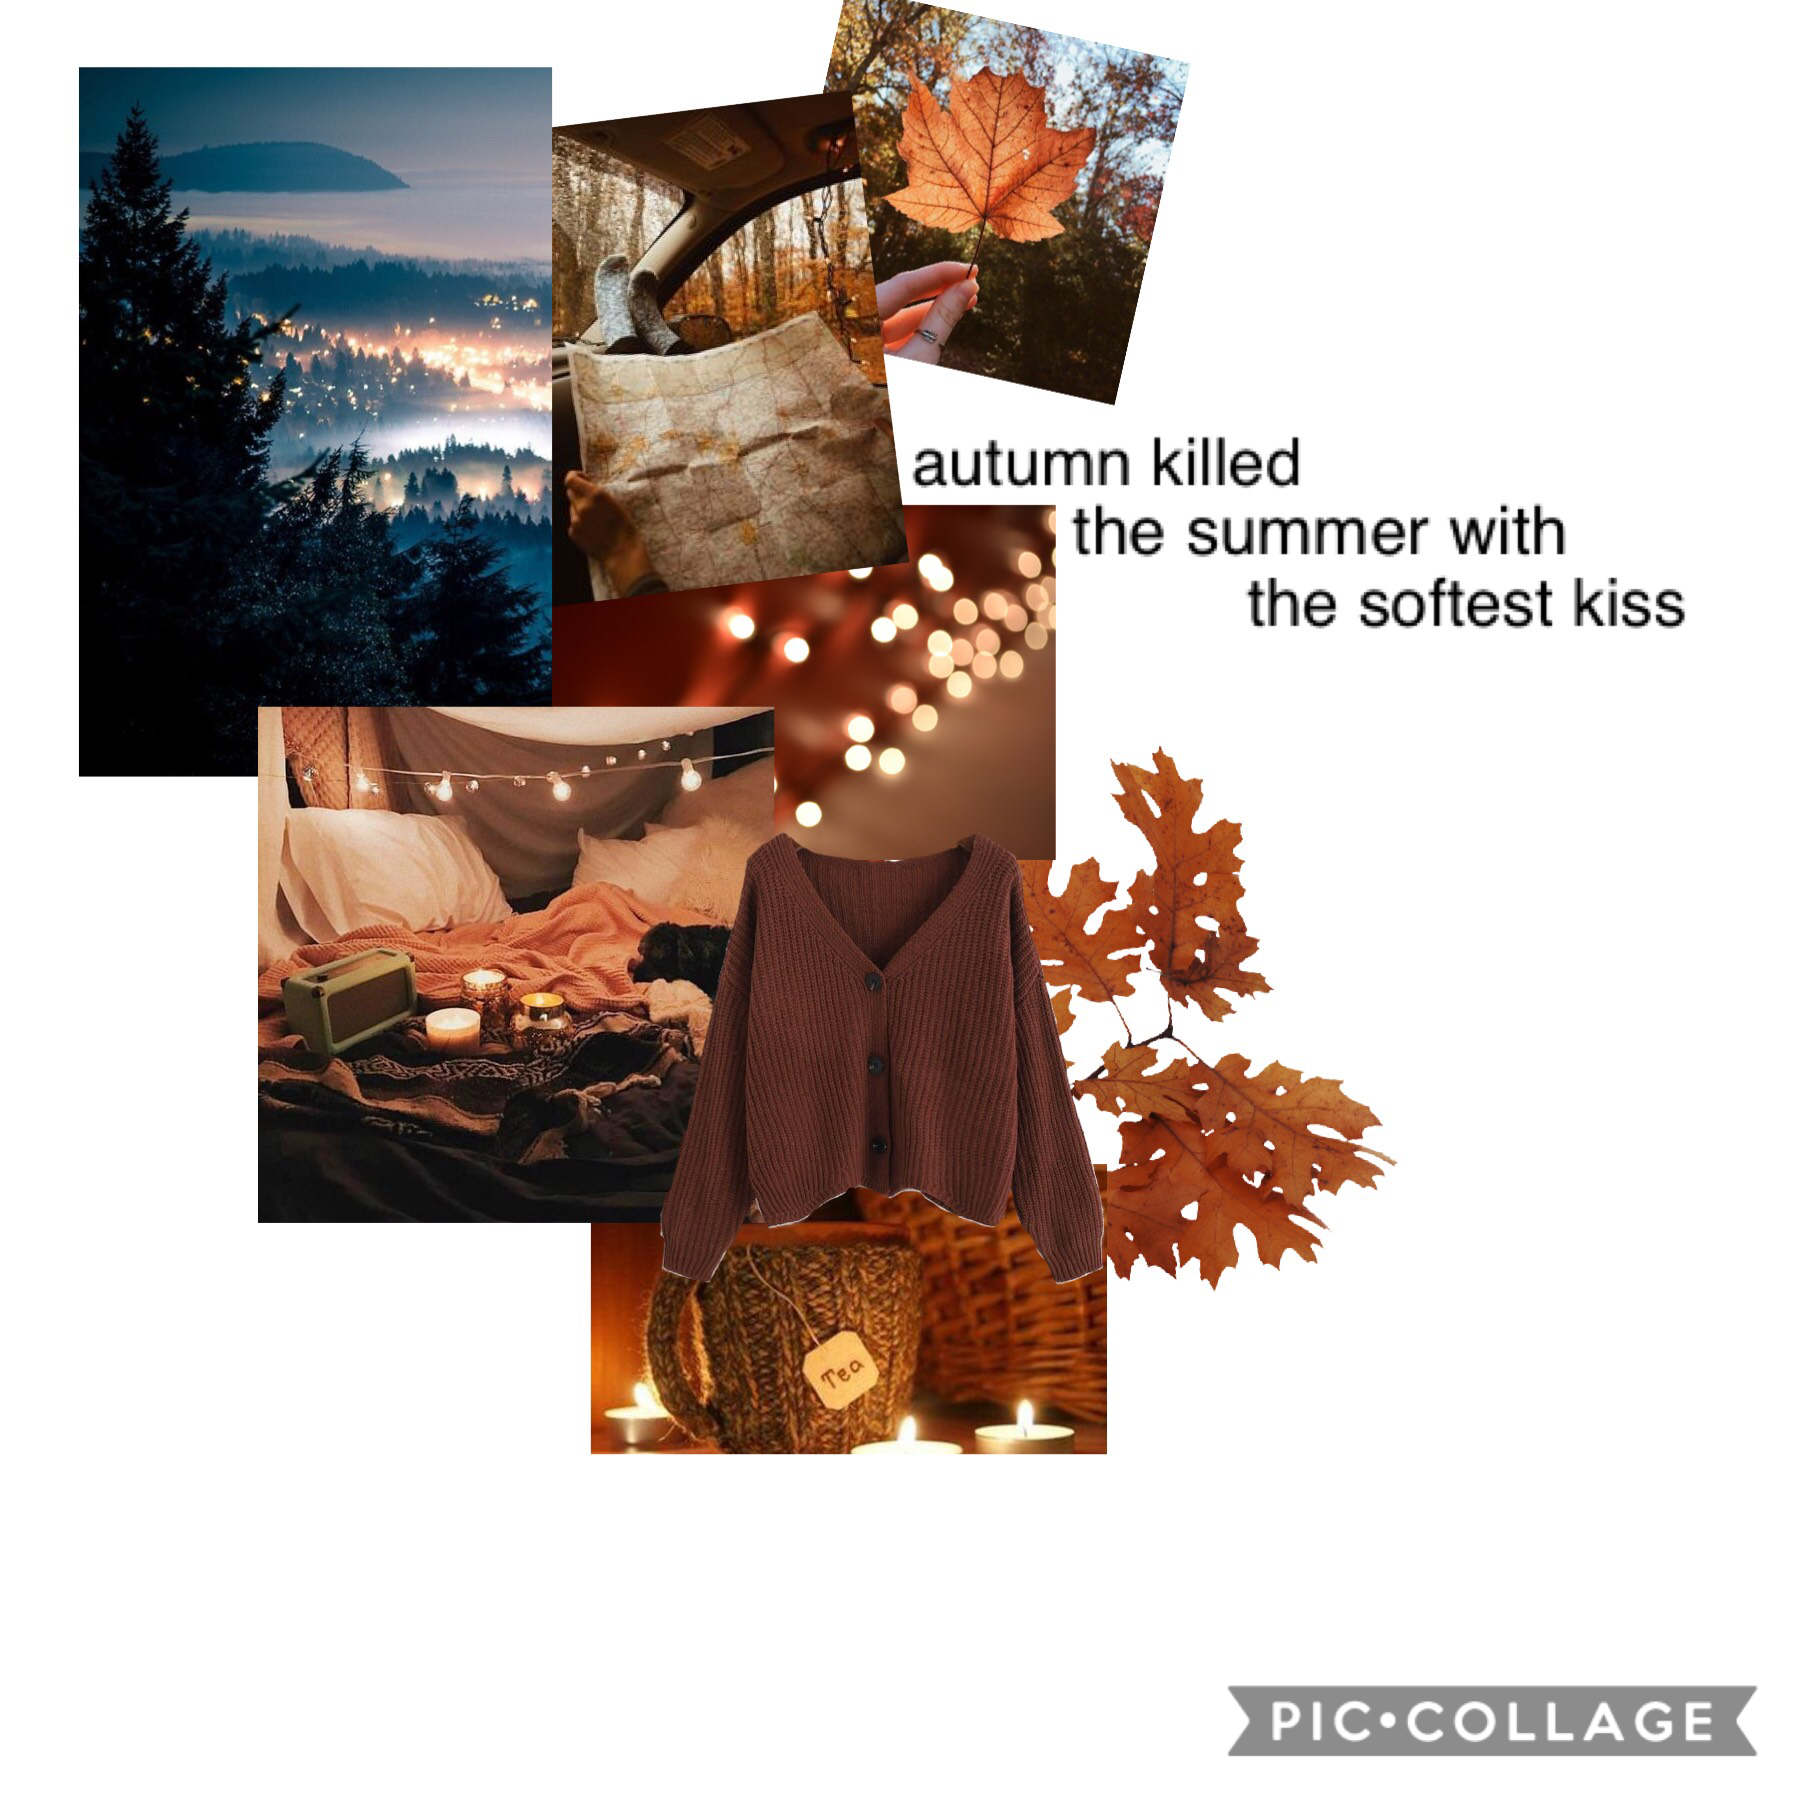 11/11/18
...
Here’s a little collage for fall! I have this short story due soon and I have no idea what to do...help?!?!